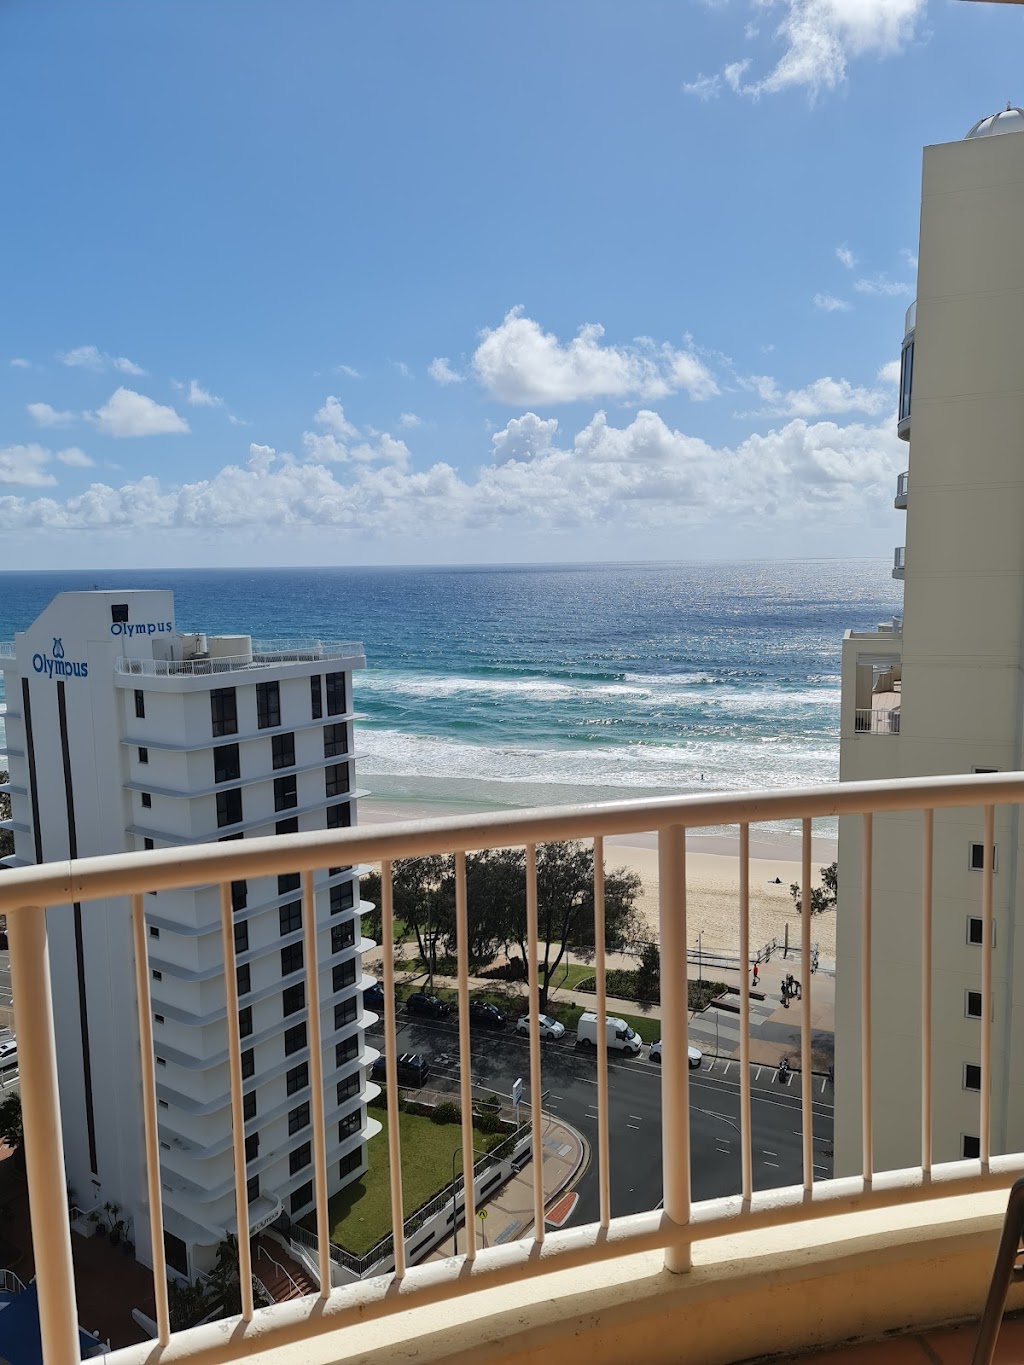 Moroccan View Tower Surfers Beach | lodging | 4-14 View Ave, Surfers Paradise QLD 4217, Australia | 0419676134 OR +61 419 676 134